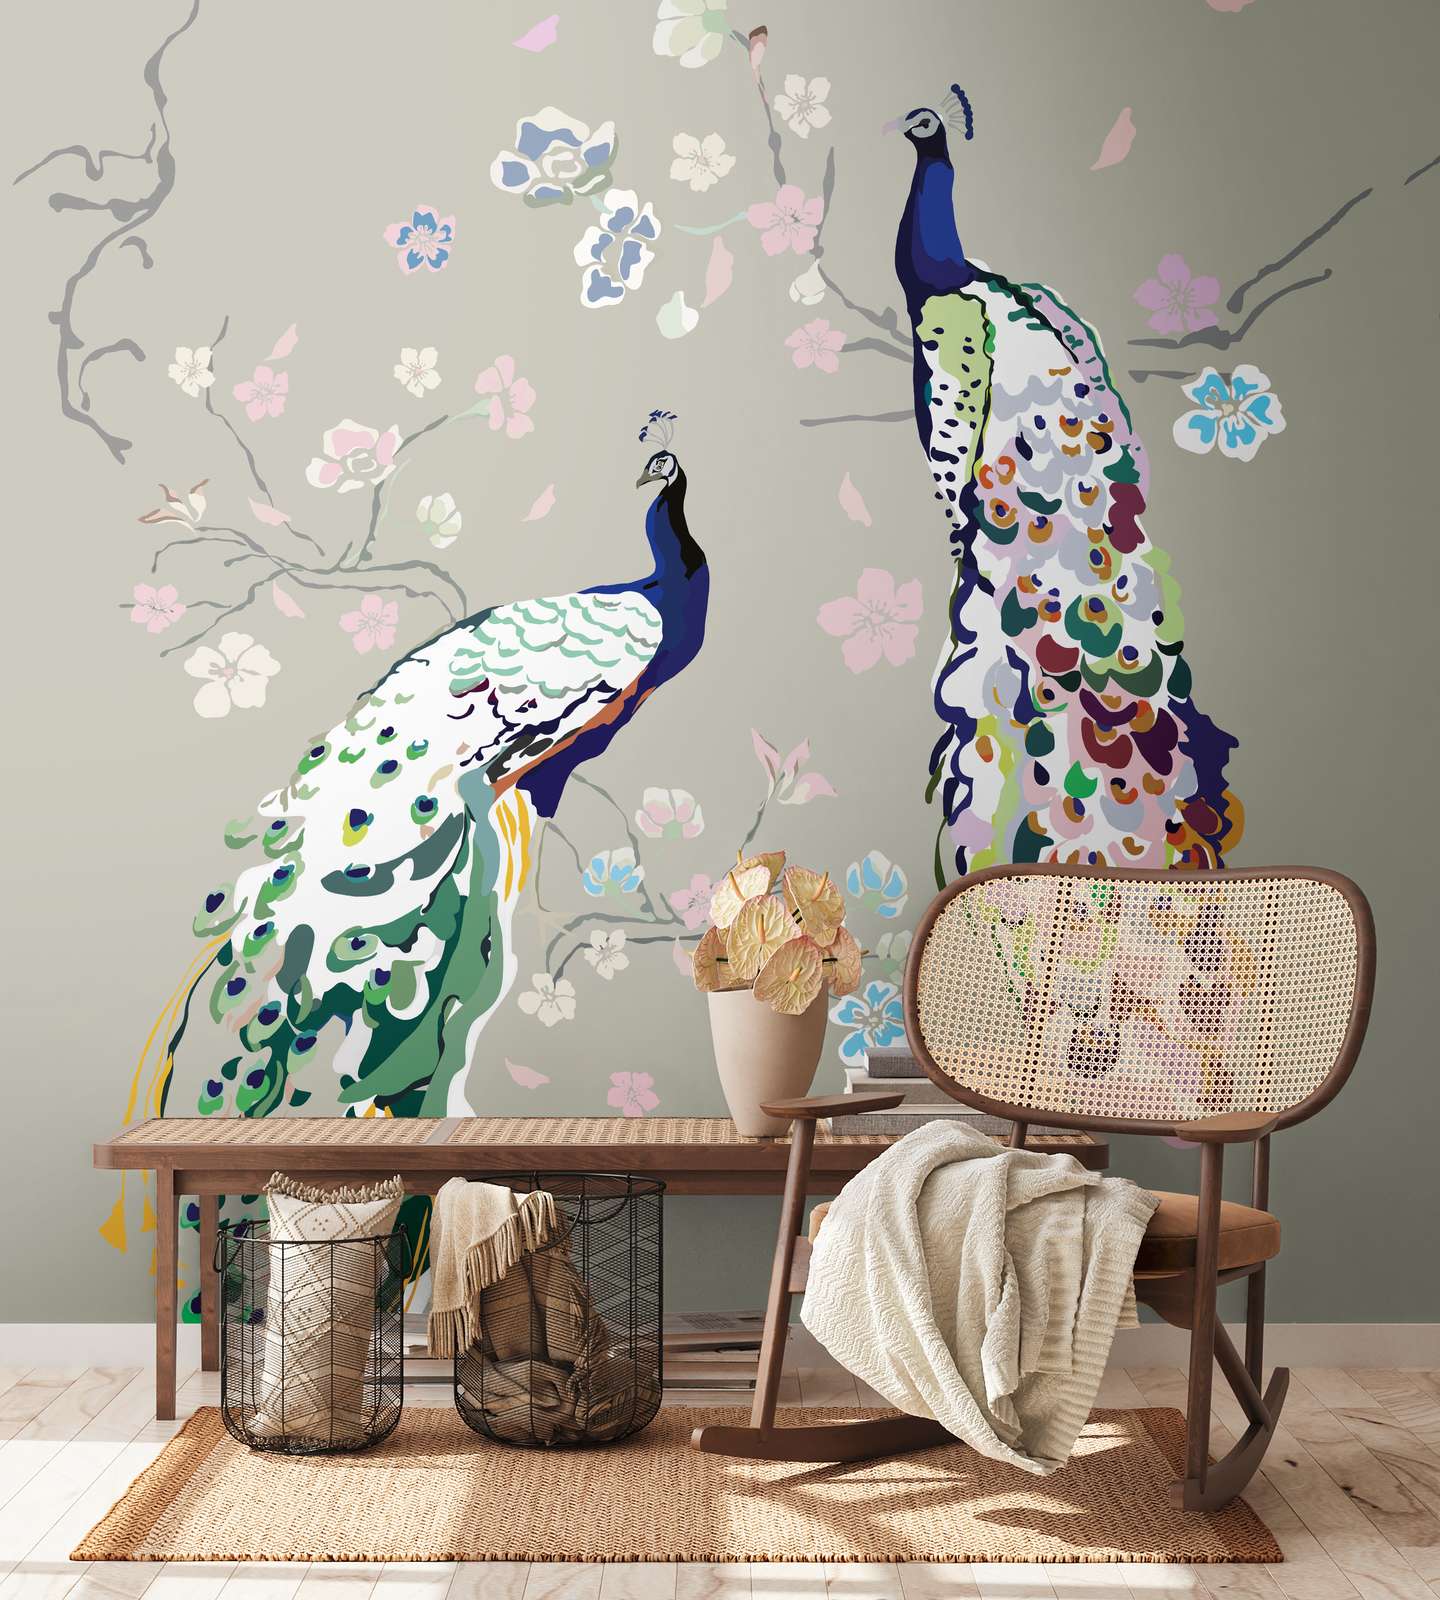             Non-woven wallpaper with peacock and floral pattern - grey, colourful, blue, green, pink, beige
        